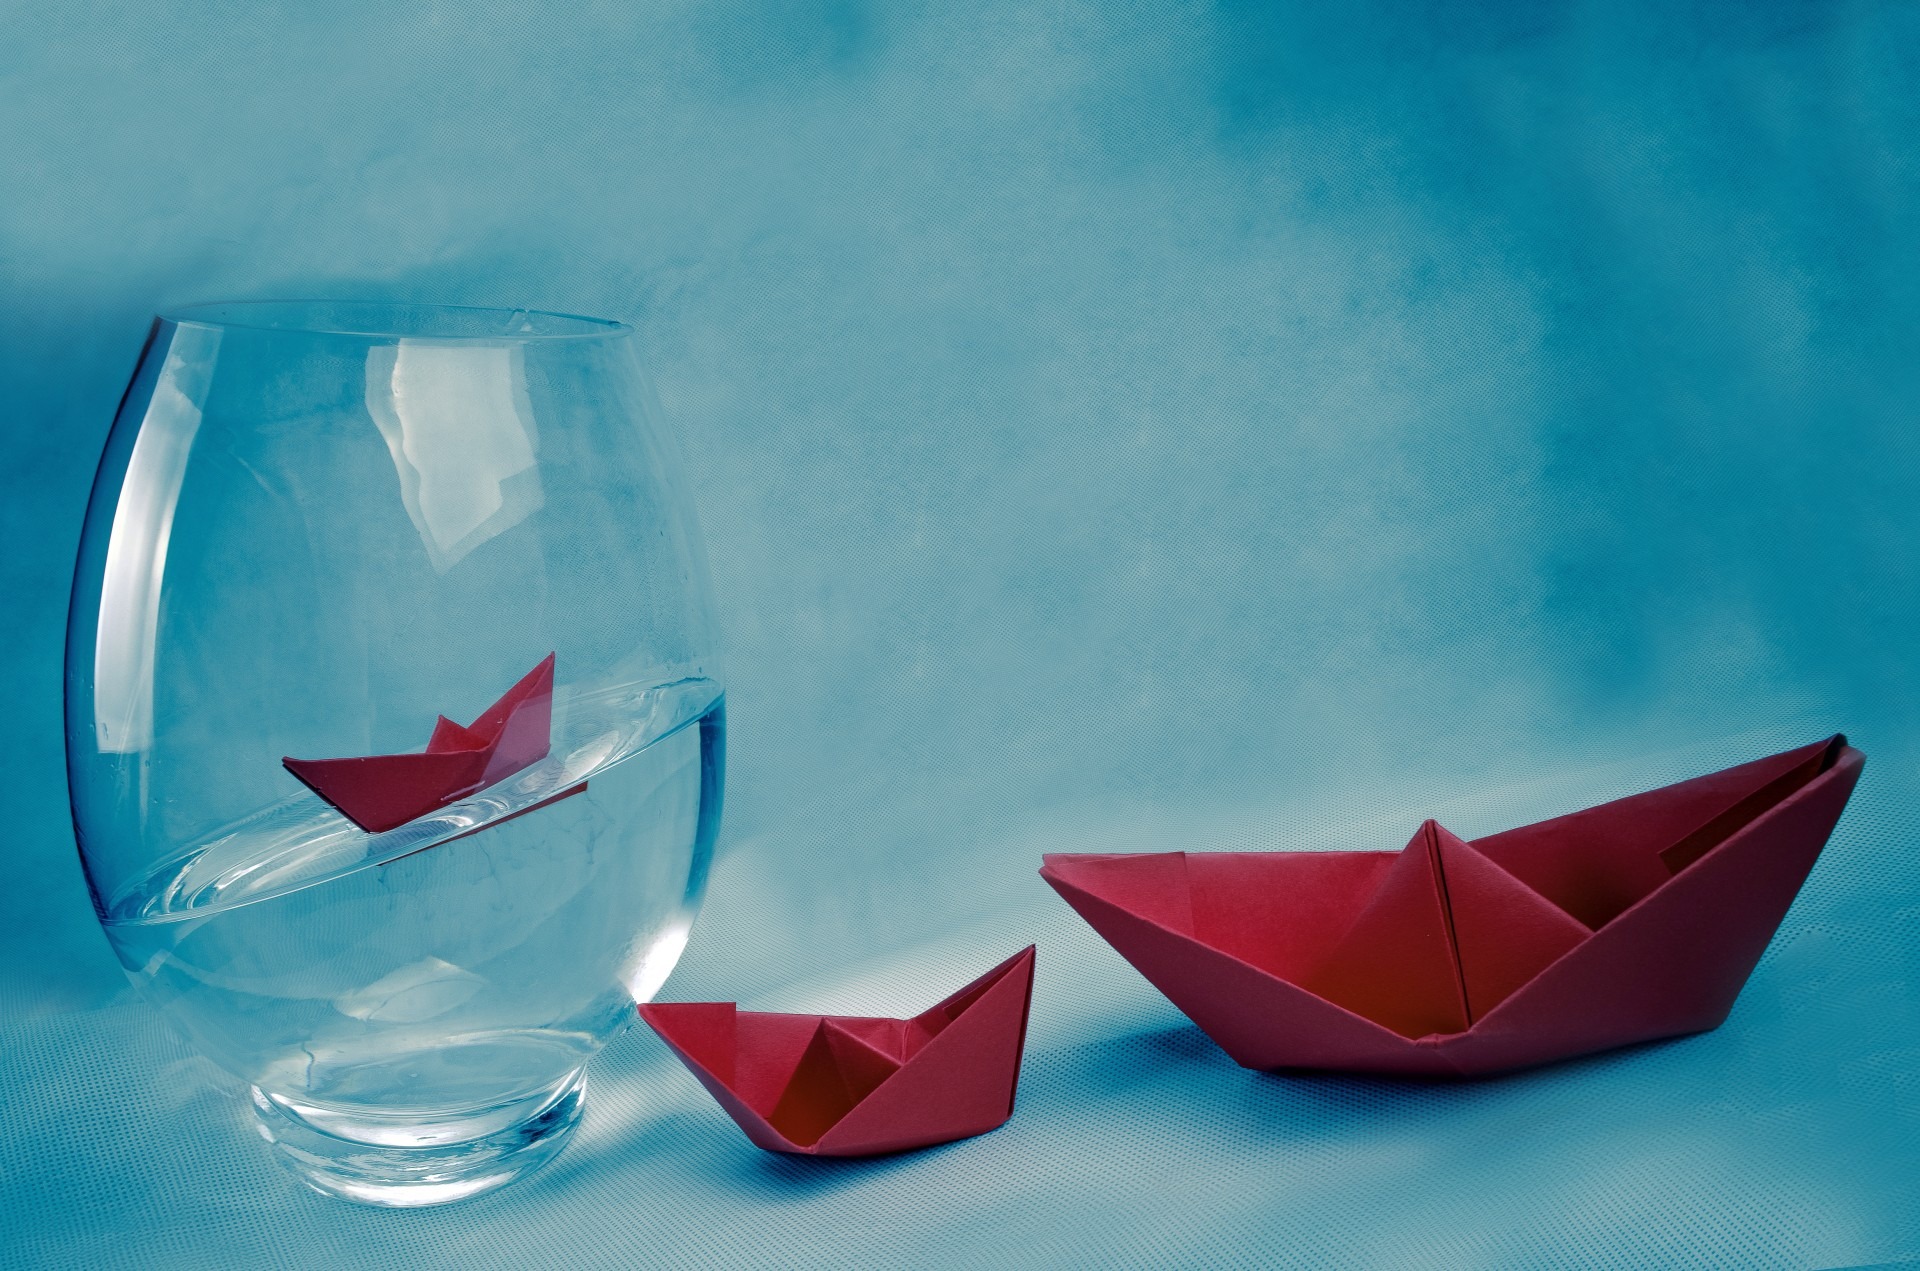 Paper boats in a vase of water